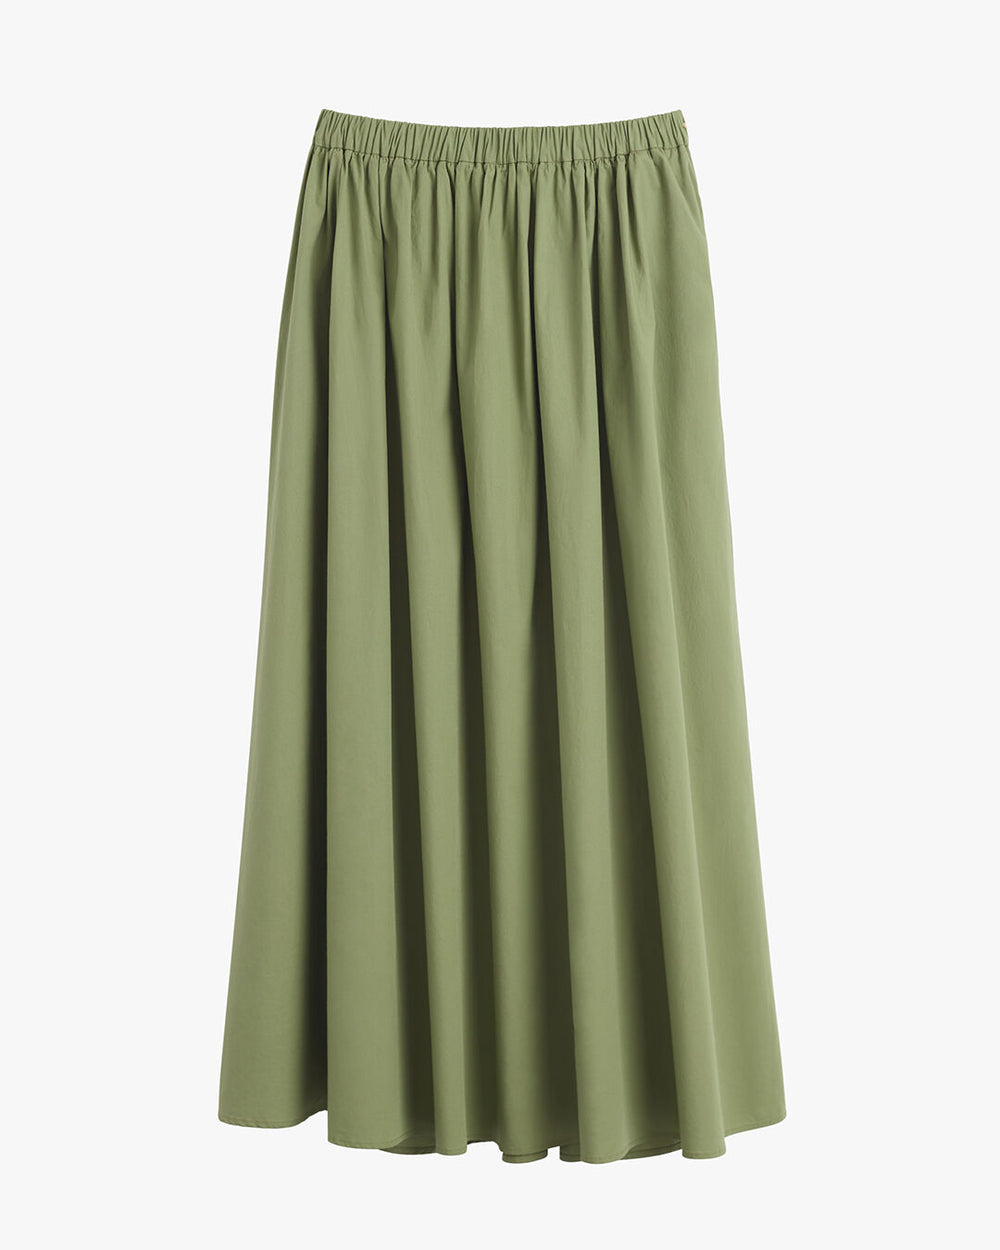 Long skirt with elastic waistband and flowing pleats.